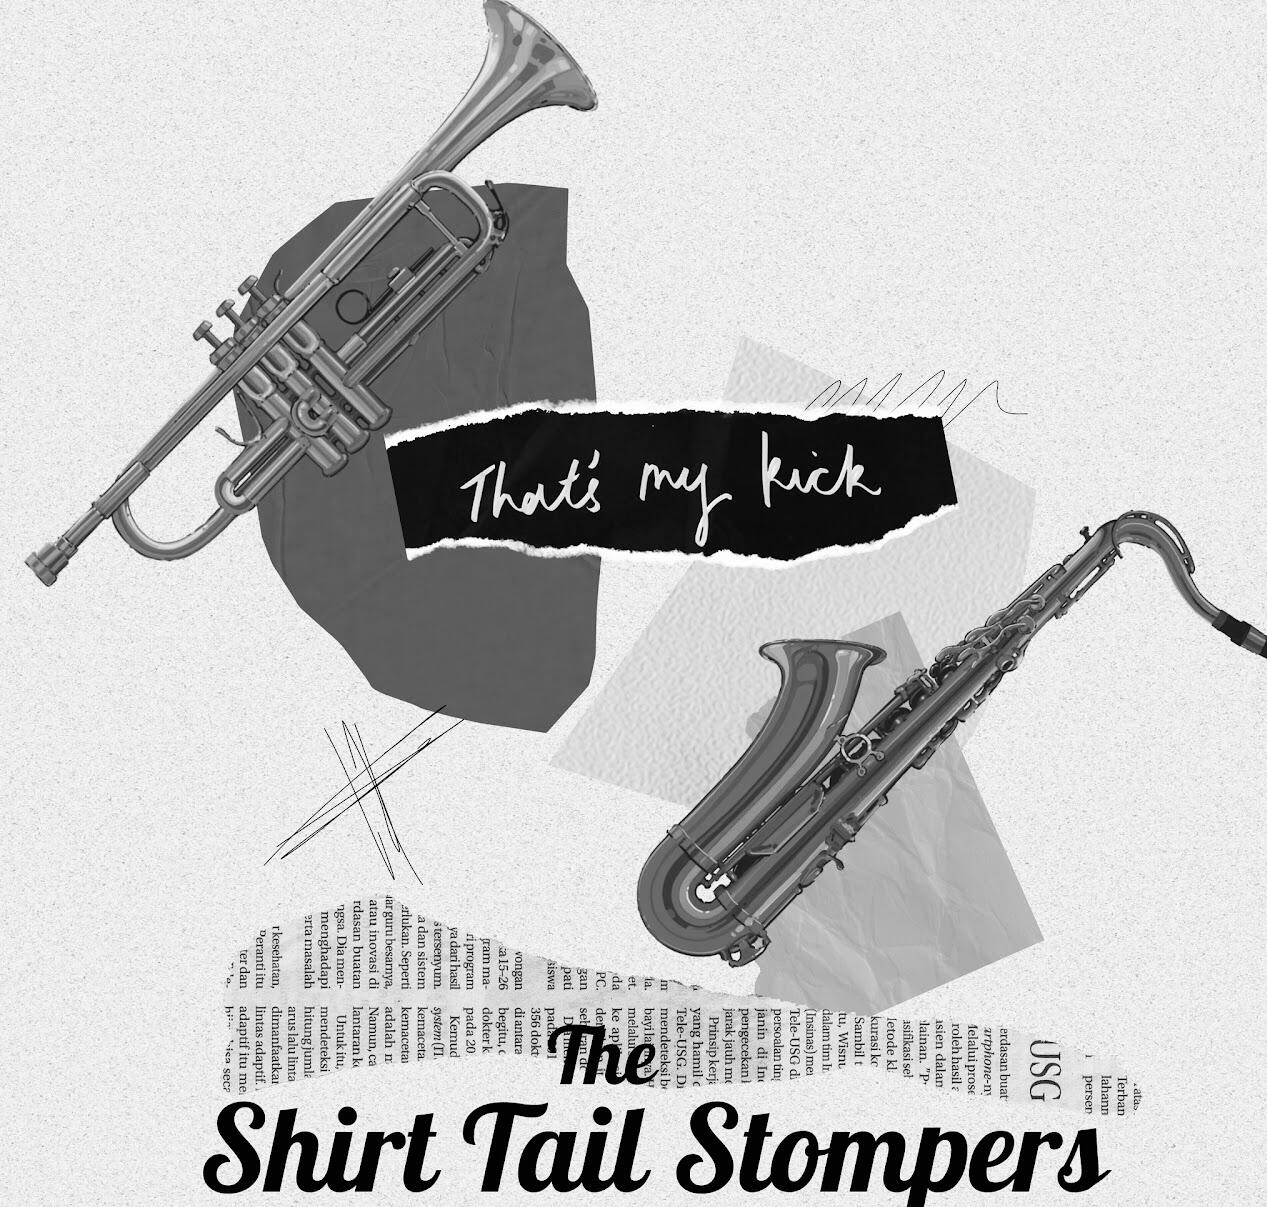 The Shirt Tail Stompers